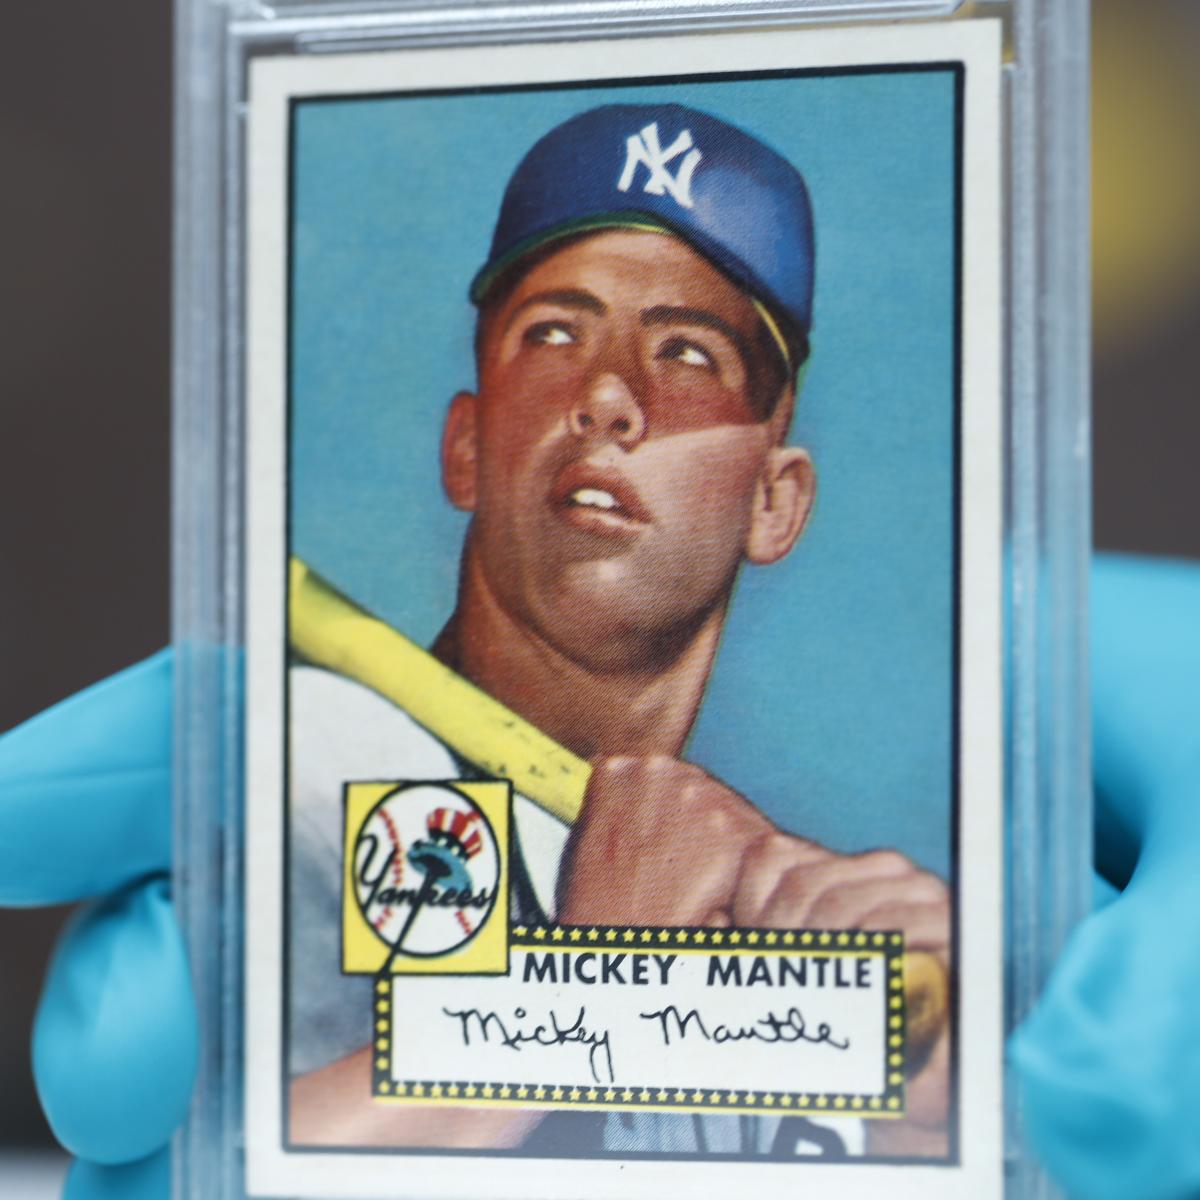 Mint 1952 Mickey Mantle Topps Card Shatters Auction Record as Most